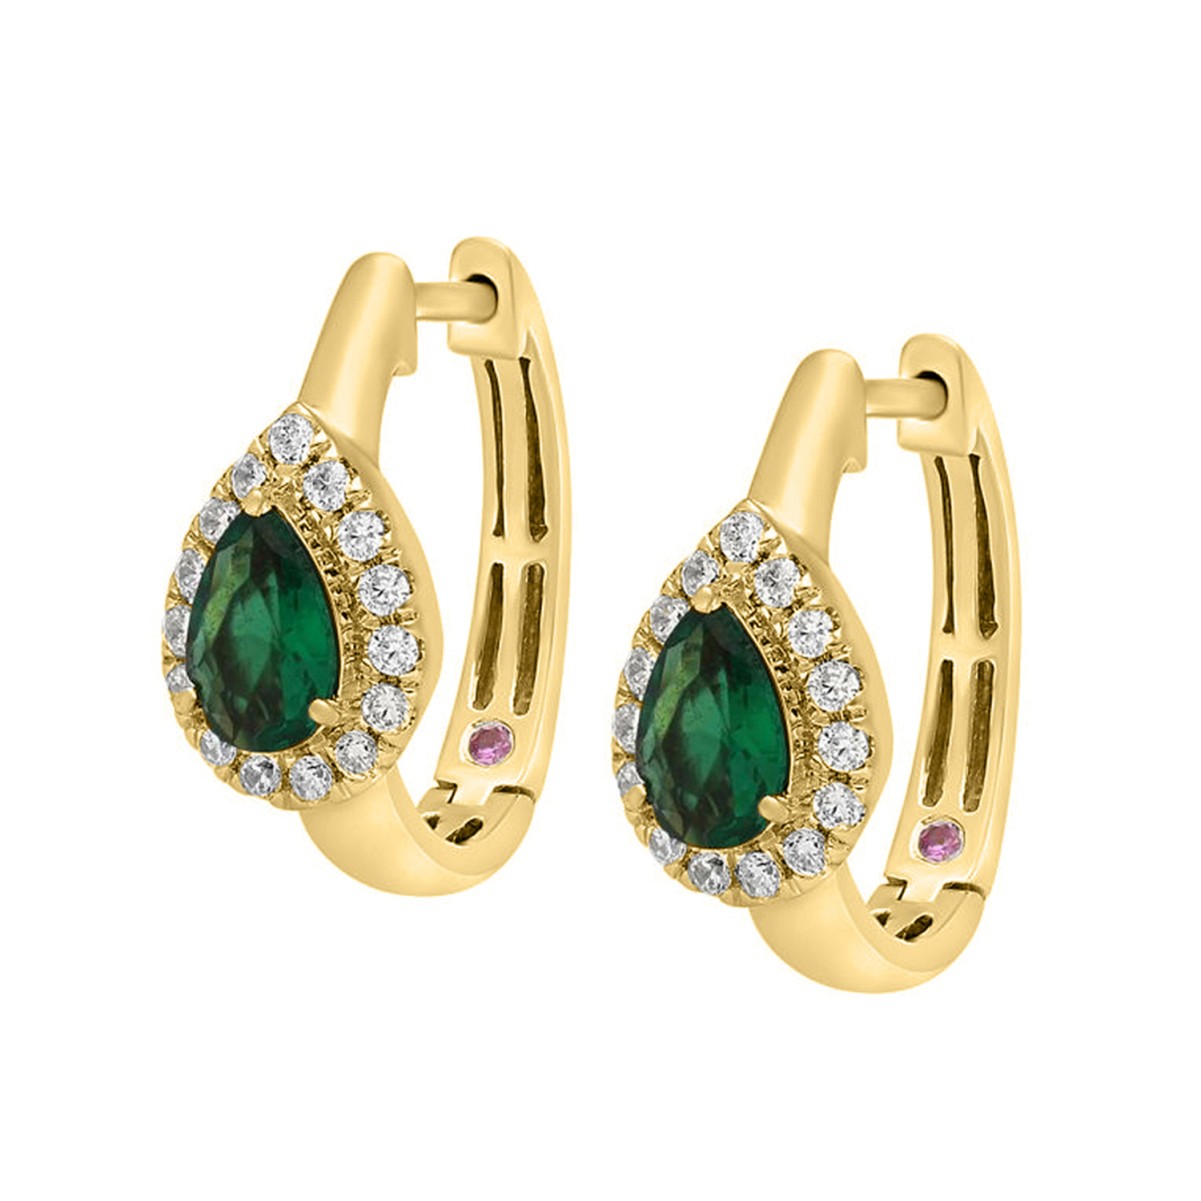 14K YELLOW GOLD 1CT ROUND/PEAR DIAMOND LADIES HOOPS EARRINGS(COLOR STONE PEAR GREEN EMERALD DIAMOND 3/4CT)